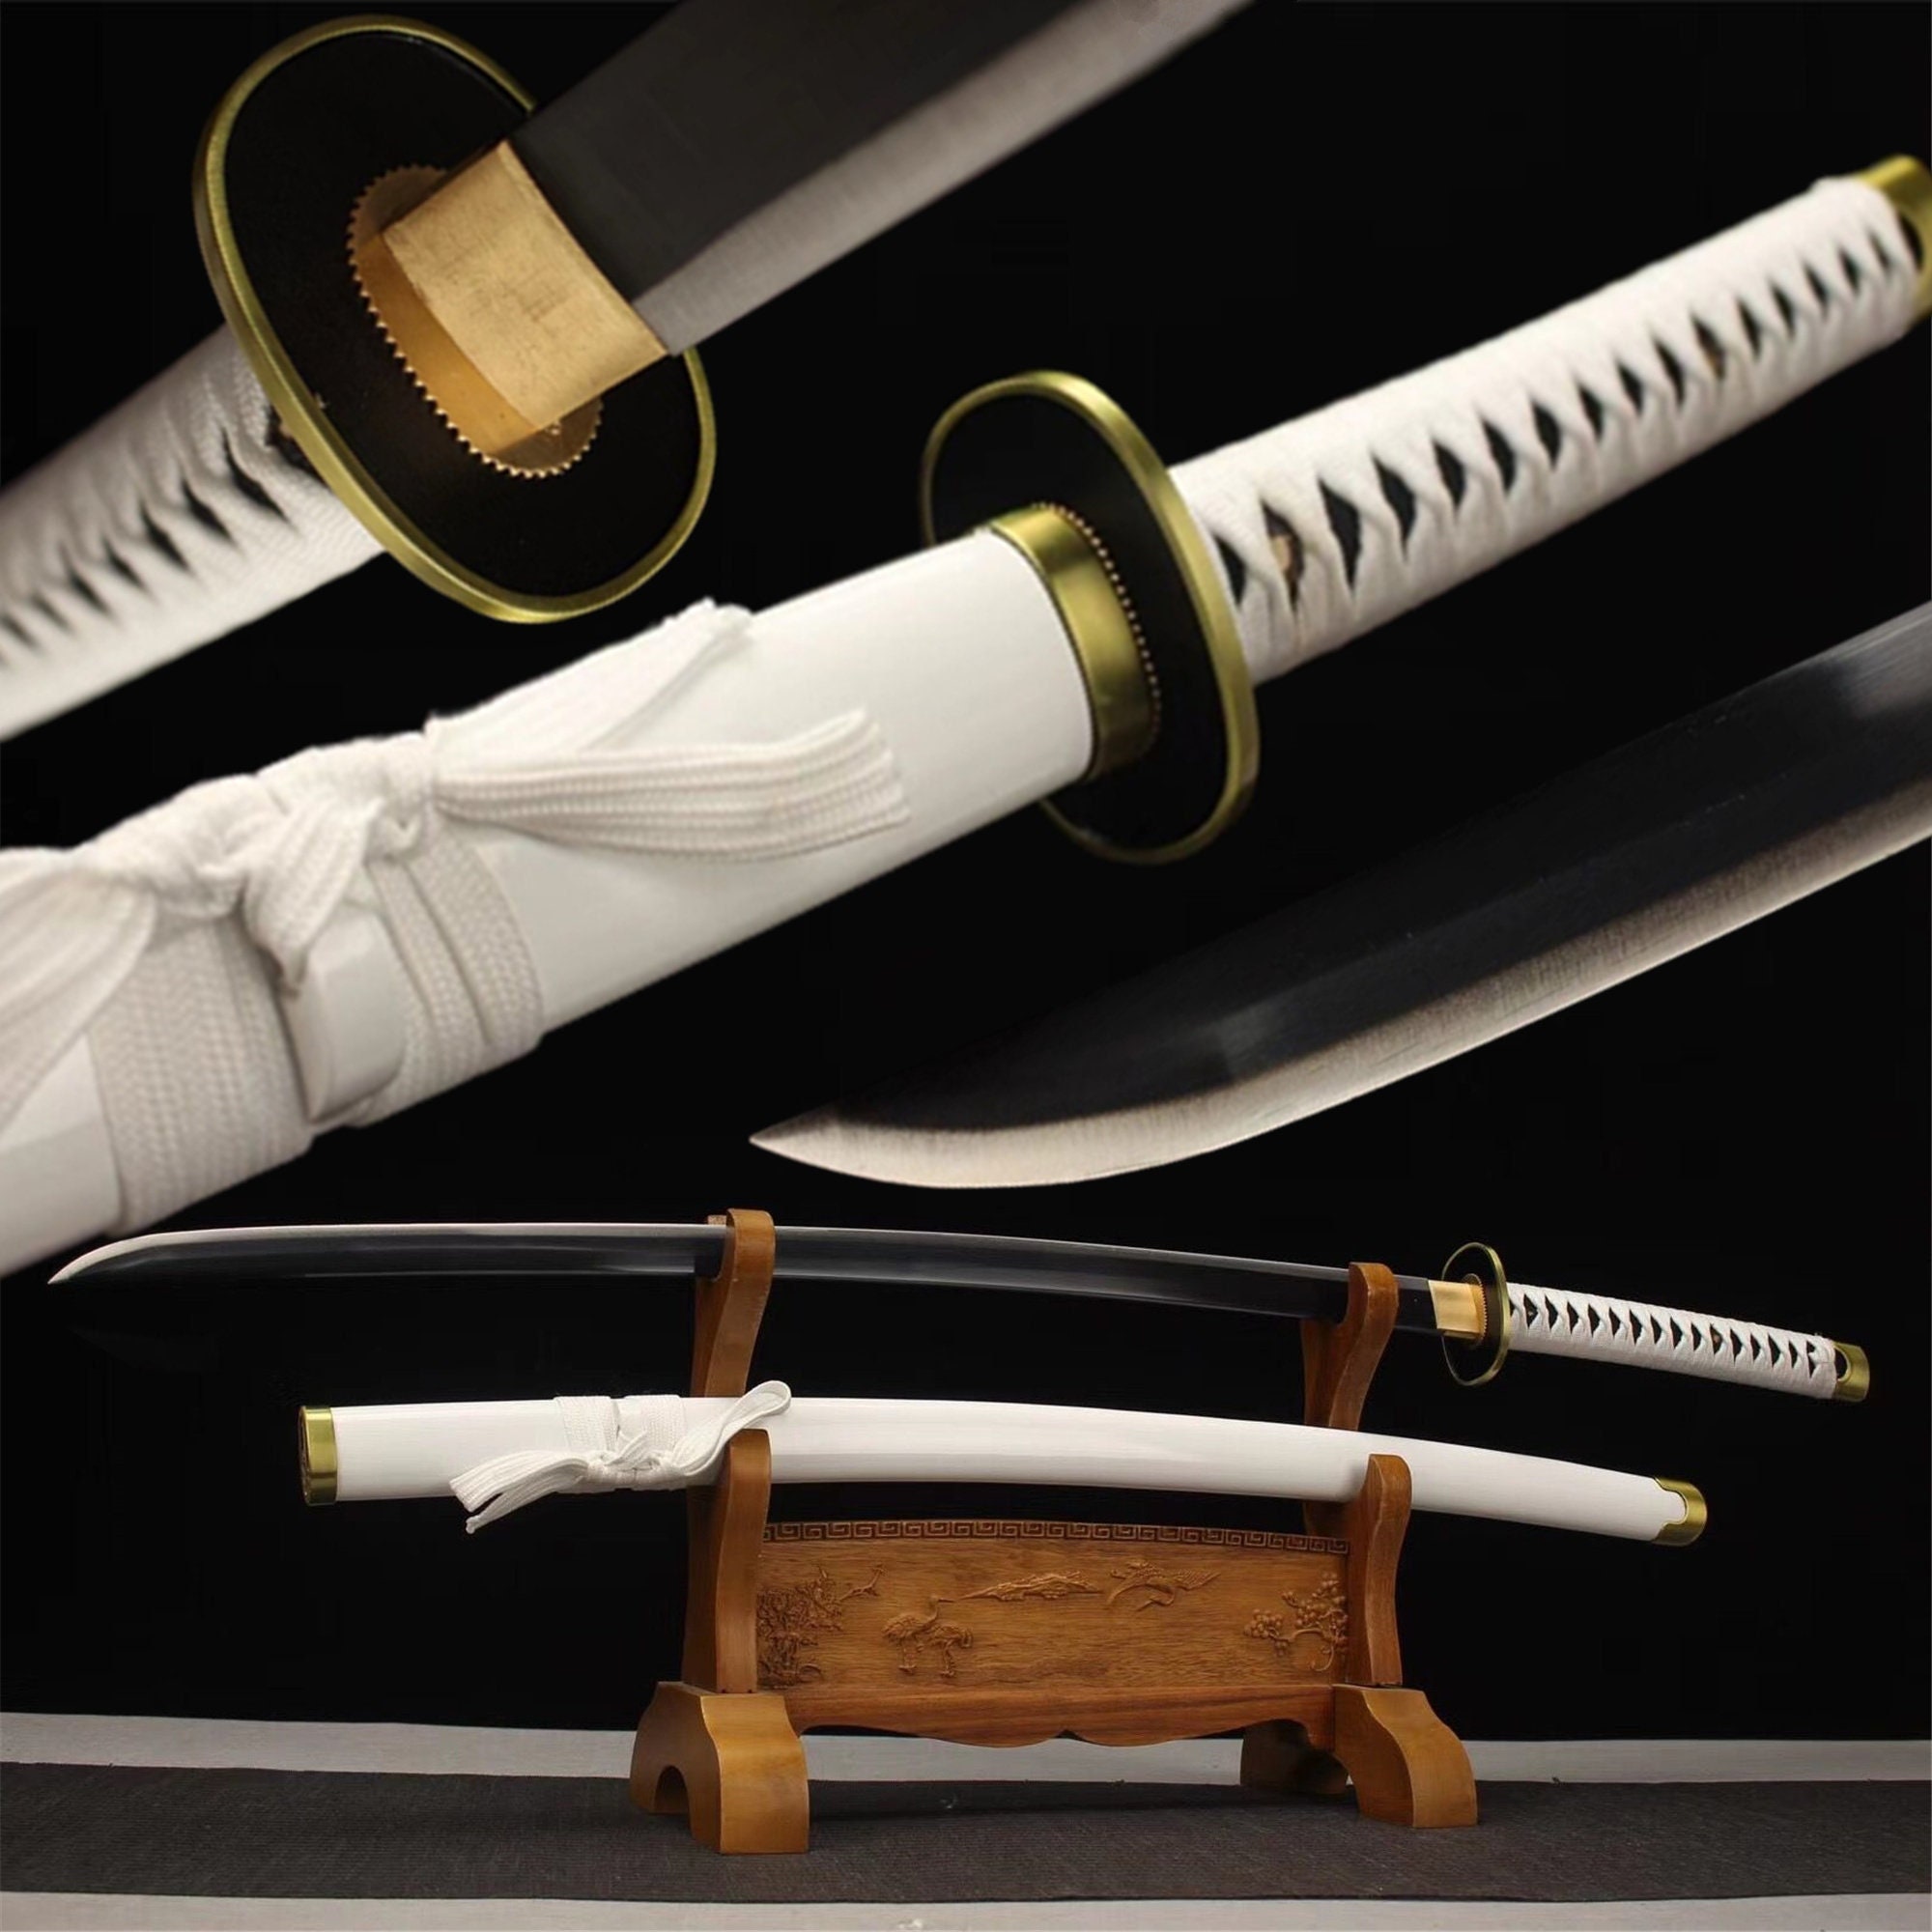 How to make a Zoro Katana out of paper, One Piece